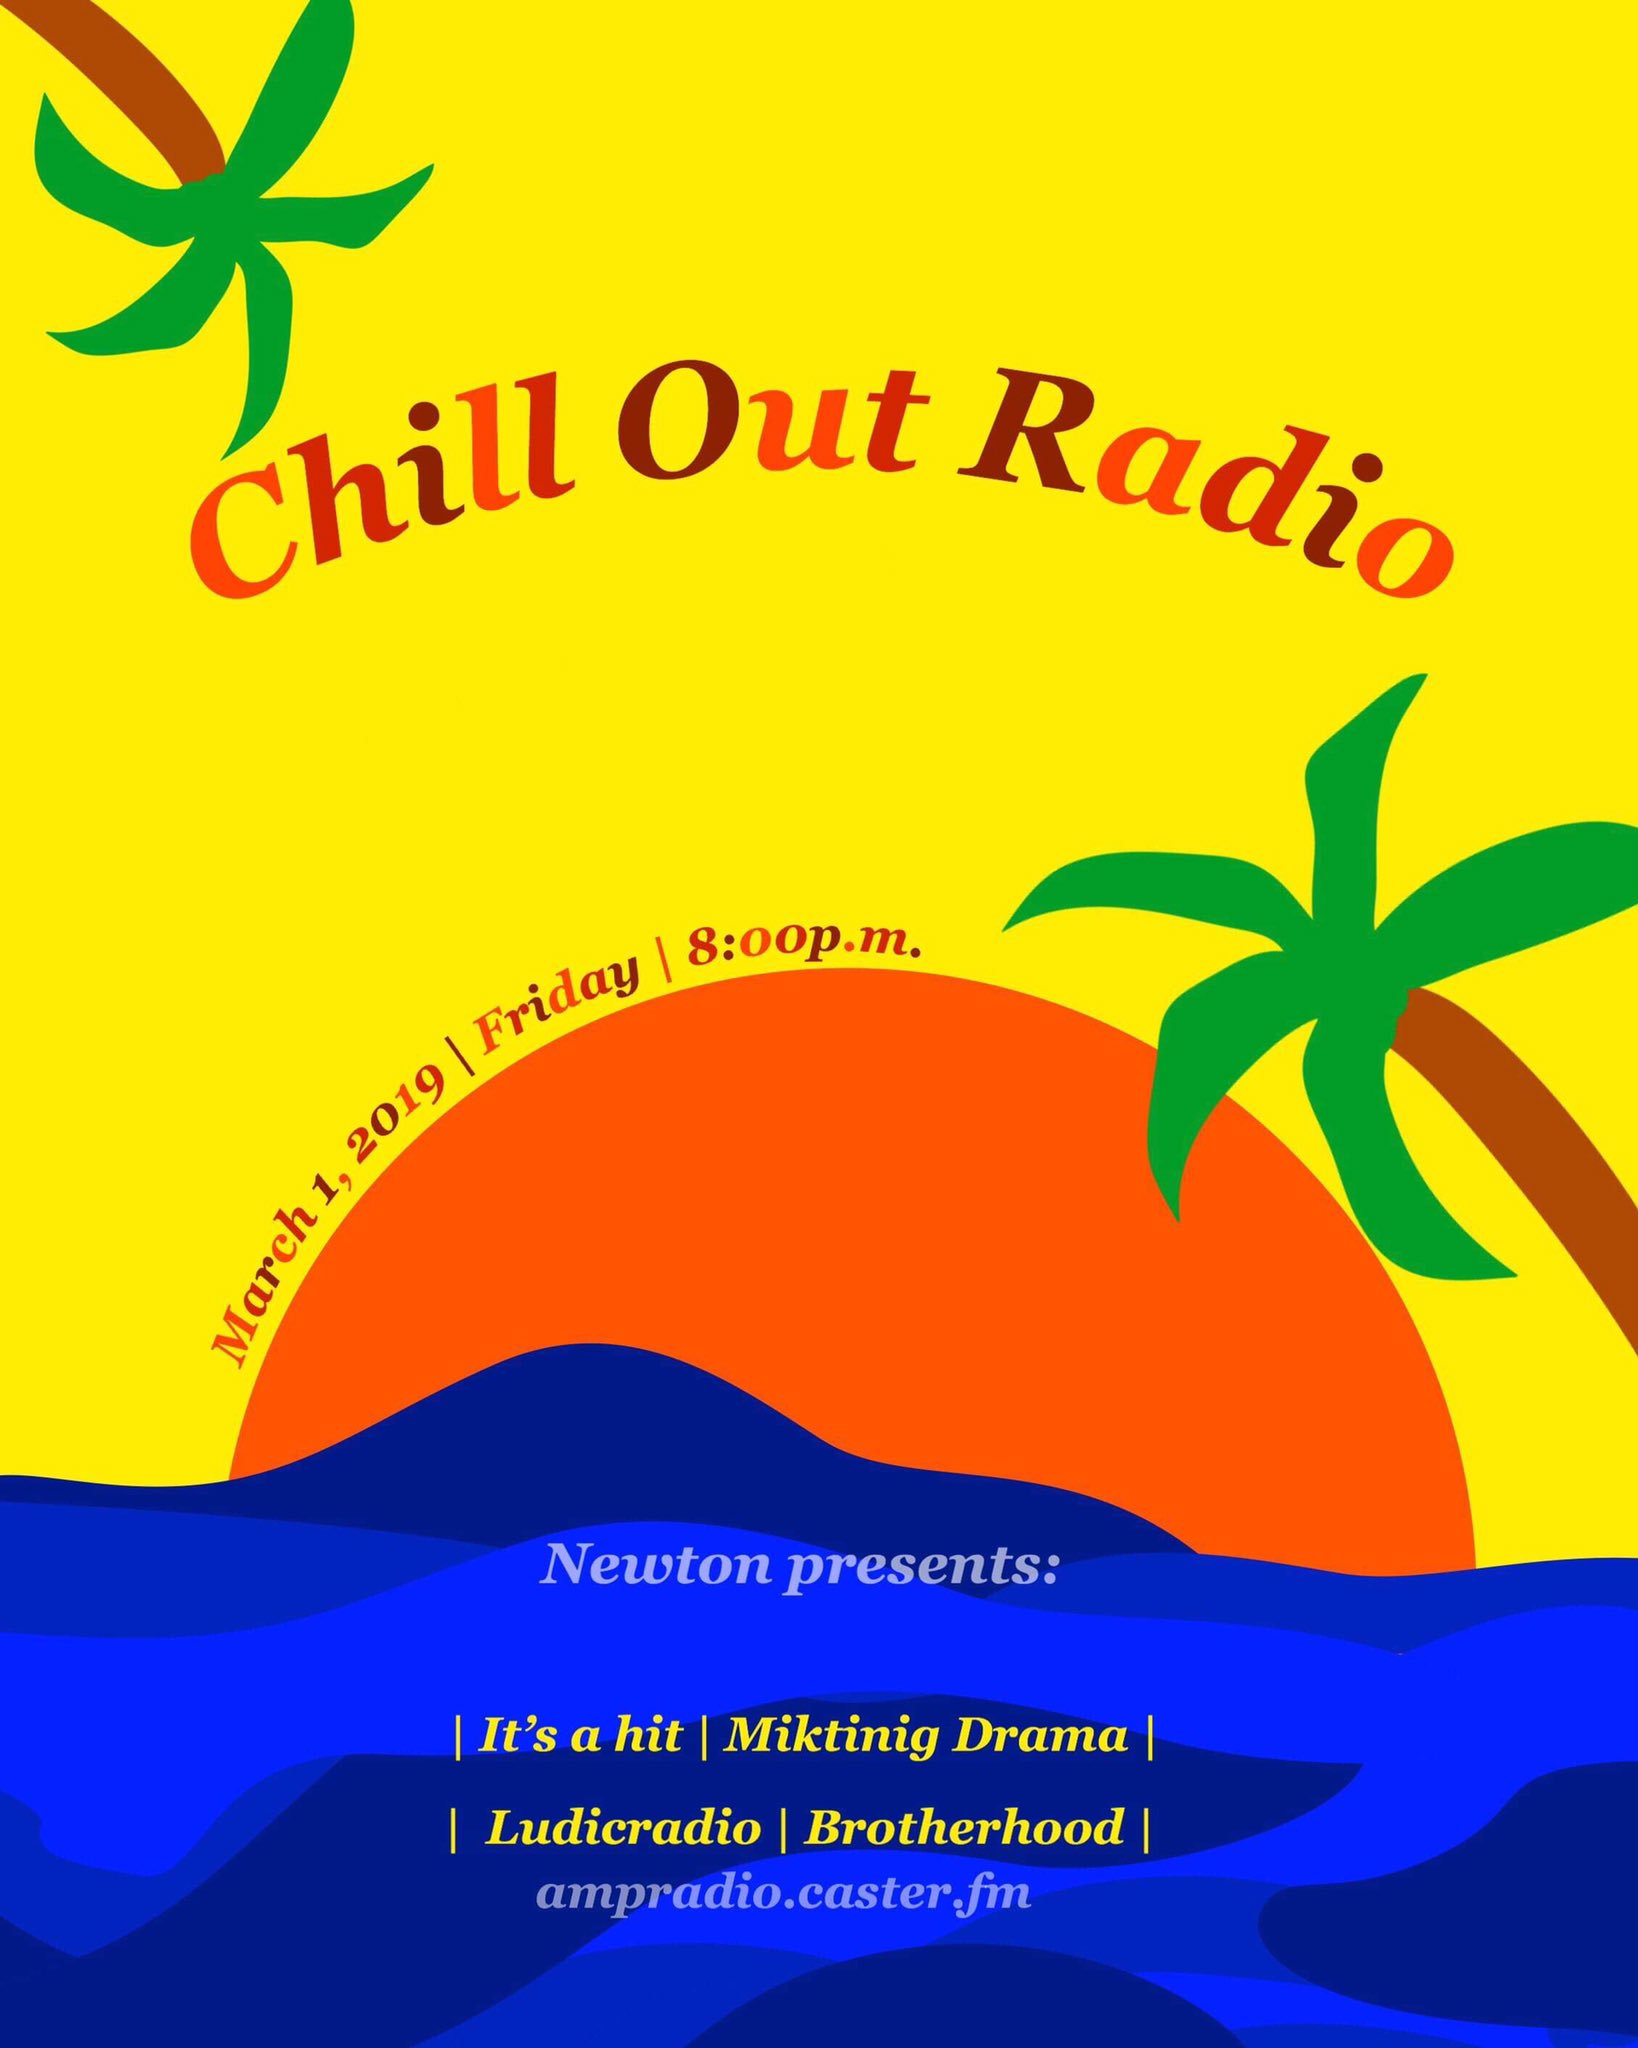 Chill Out Radio (@ChillOutRadio_) / Twitter